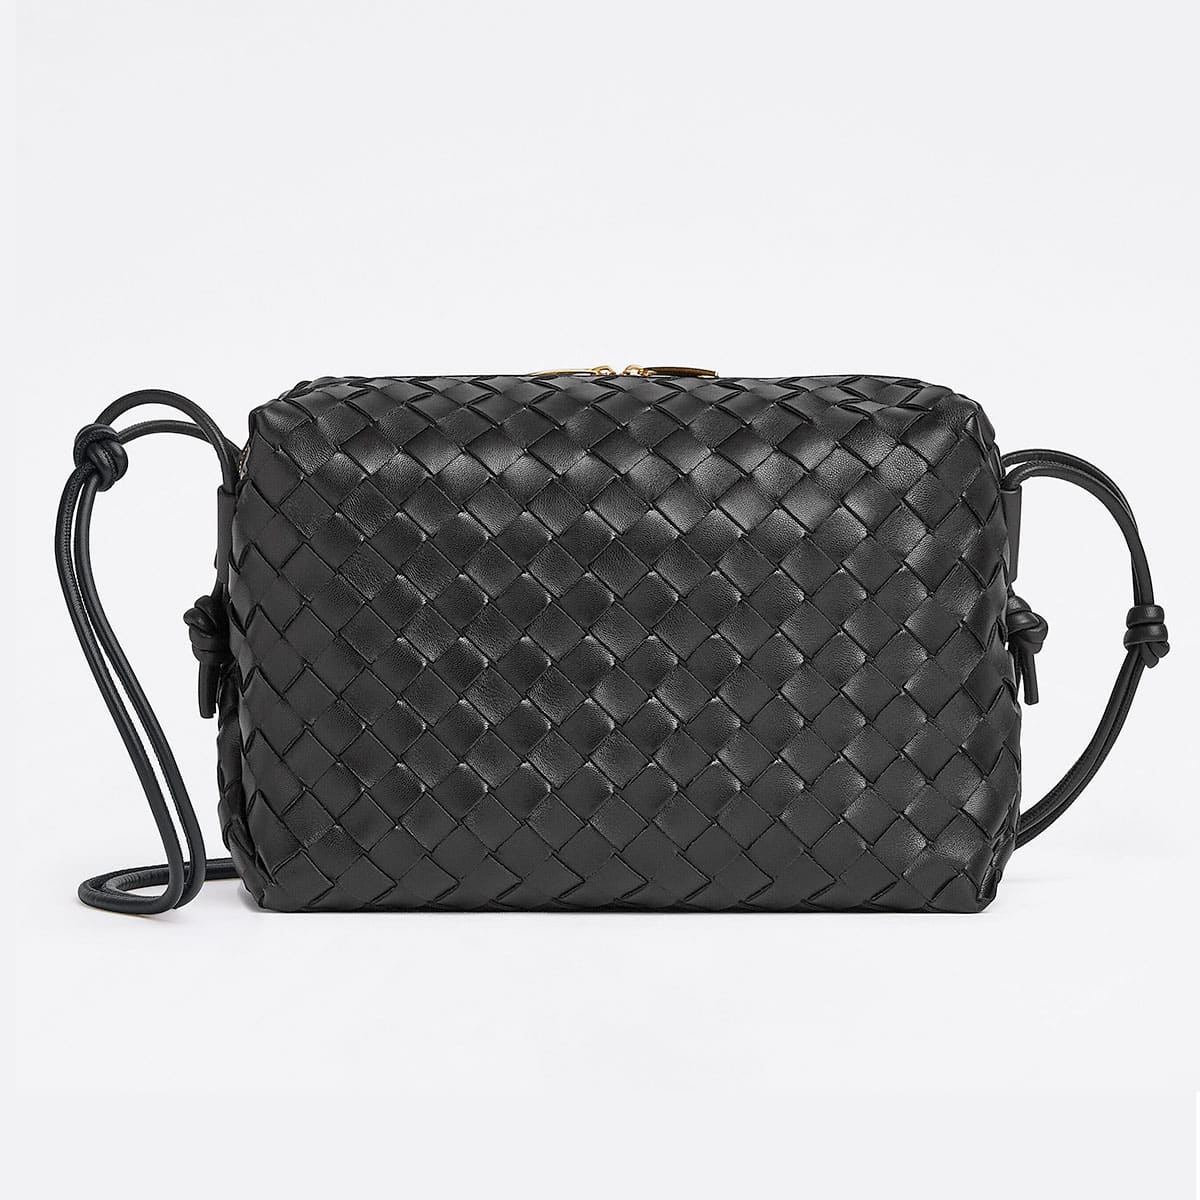 The OnTheGo East West Is A Fun Additon To The Louis Vuitton Family -  BAGAHOLICBOY